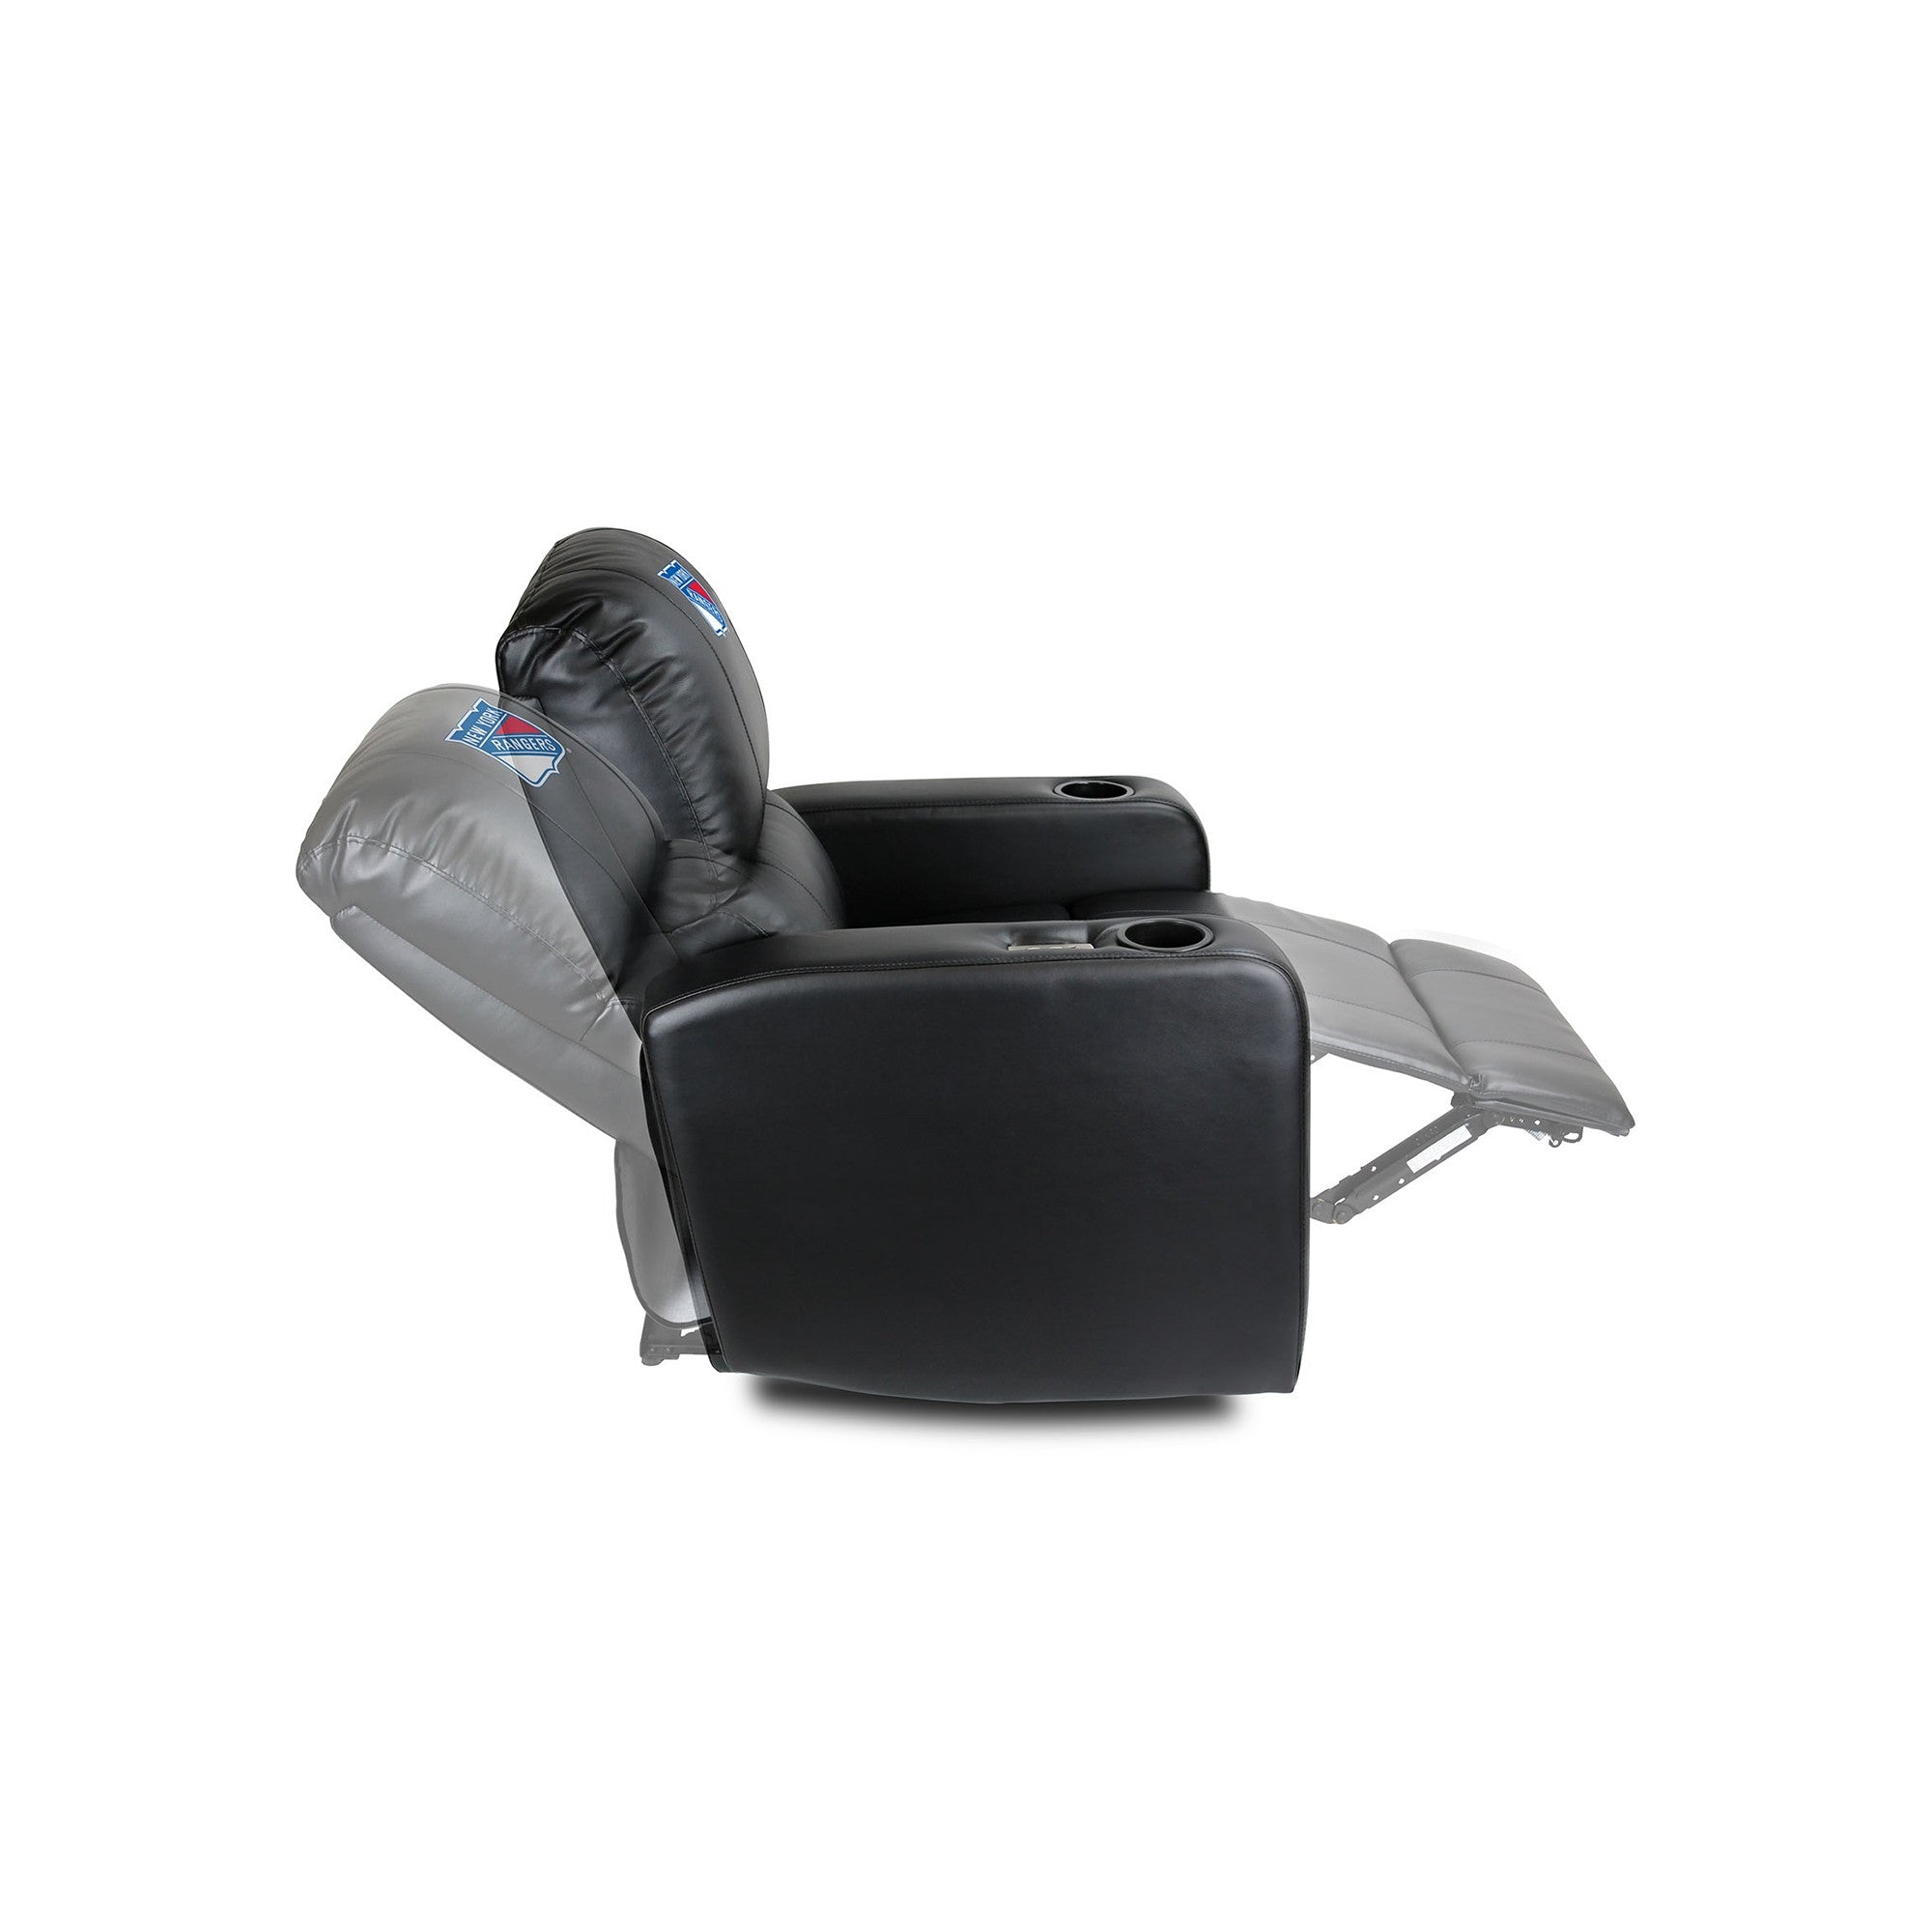 Imperial New York Rangers Power Theater Recliner With USB Port